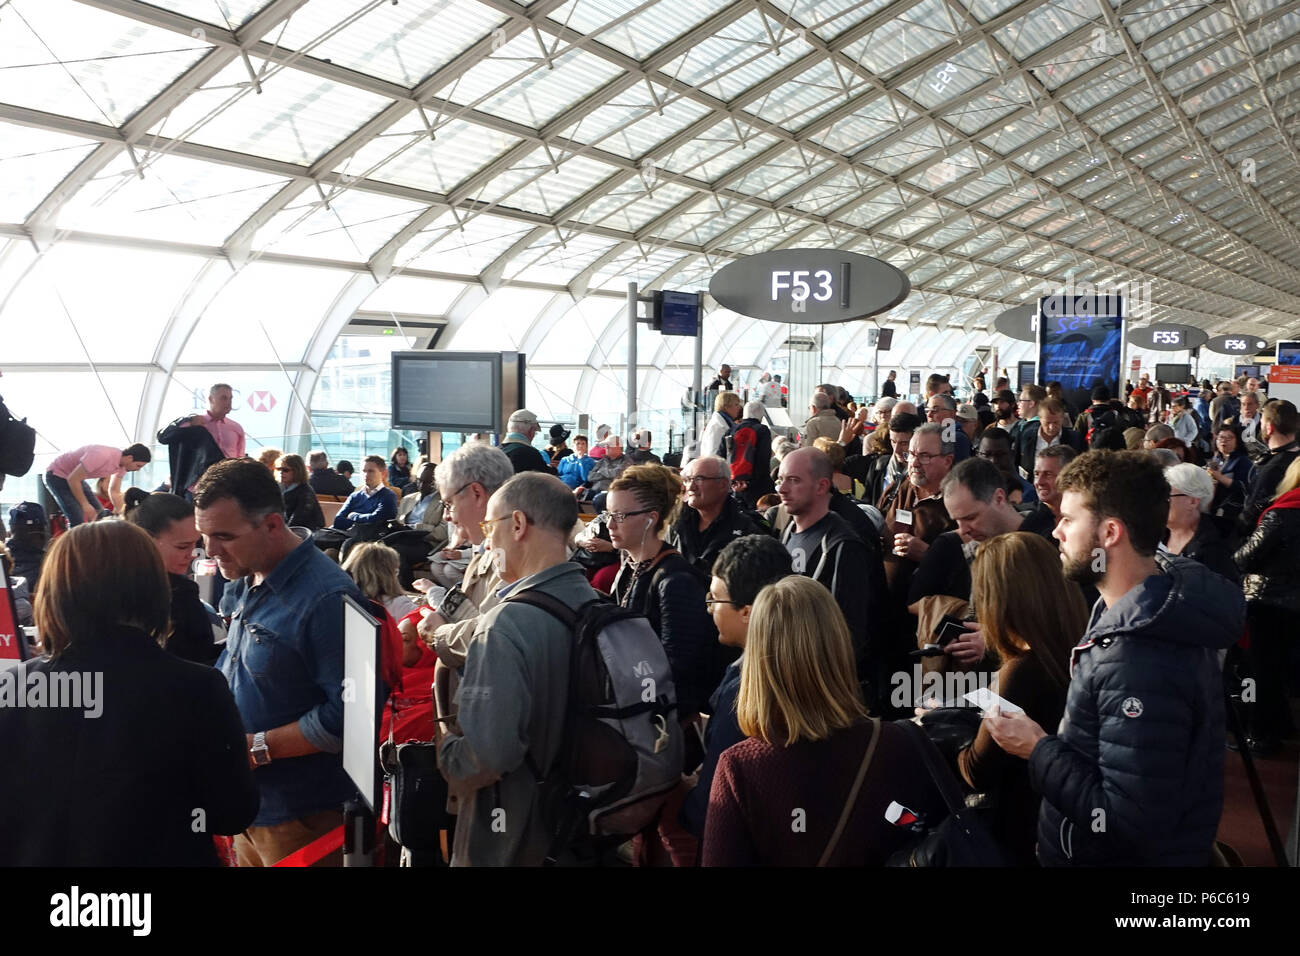 Paris, France, people in a concourse of Charles de Gaulle airport Stock Photo